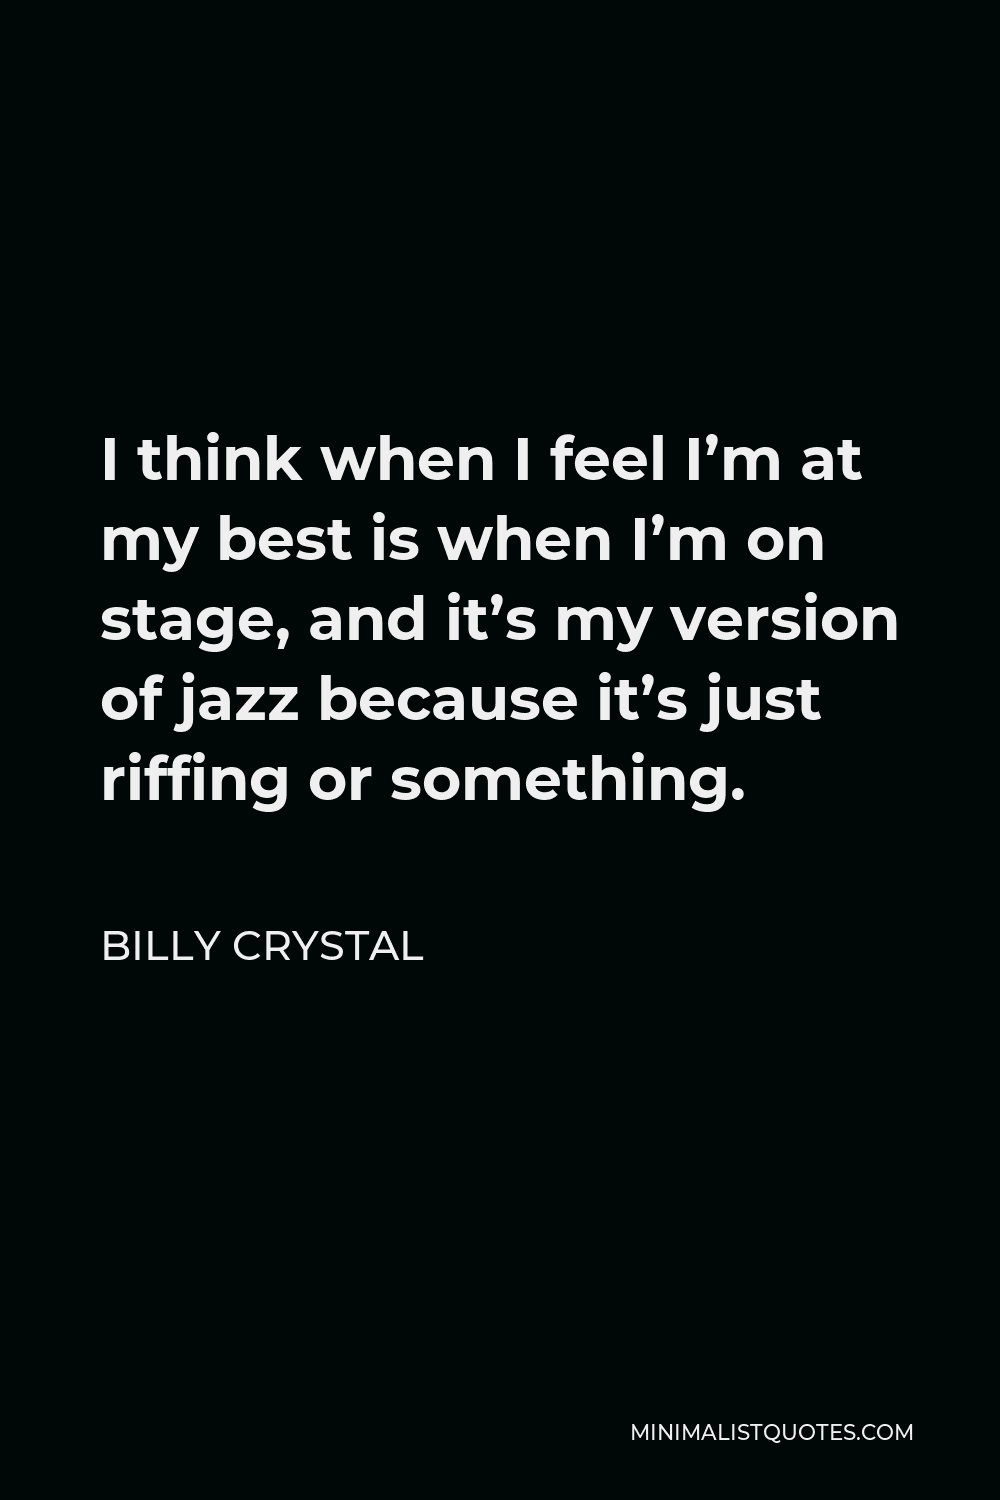 Billy Crystal Quote - I think when I feel I’m at my best is when I’m on stage, and it’s my version of jazz because it’s just riffing or something.